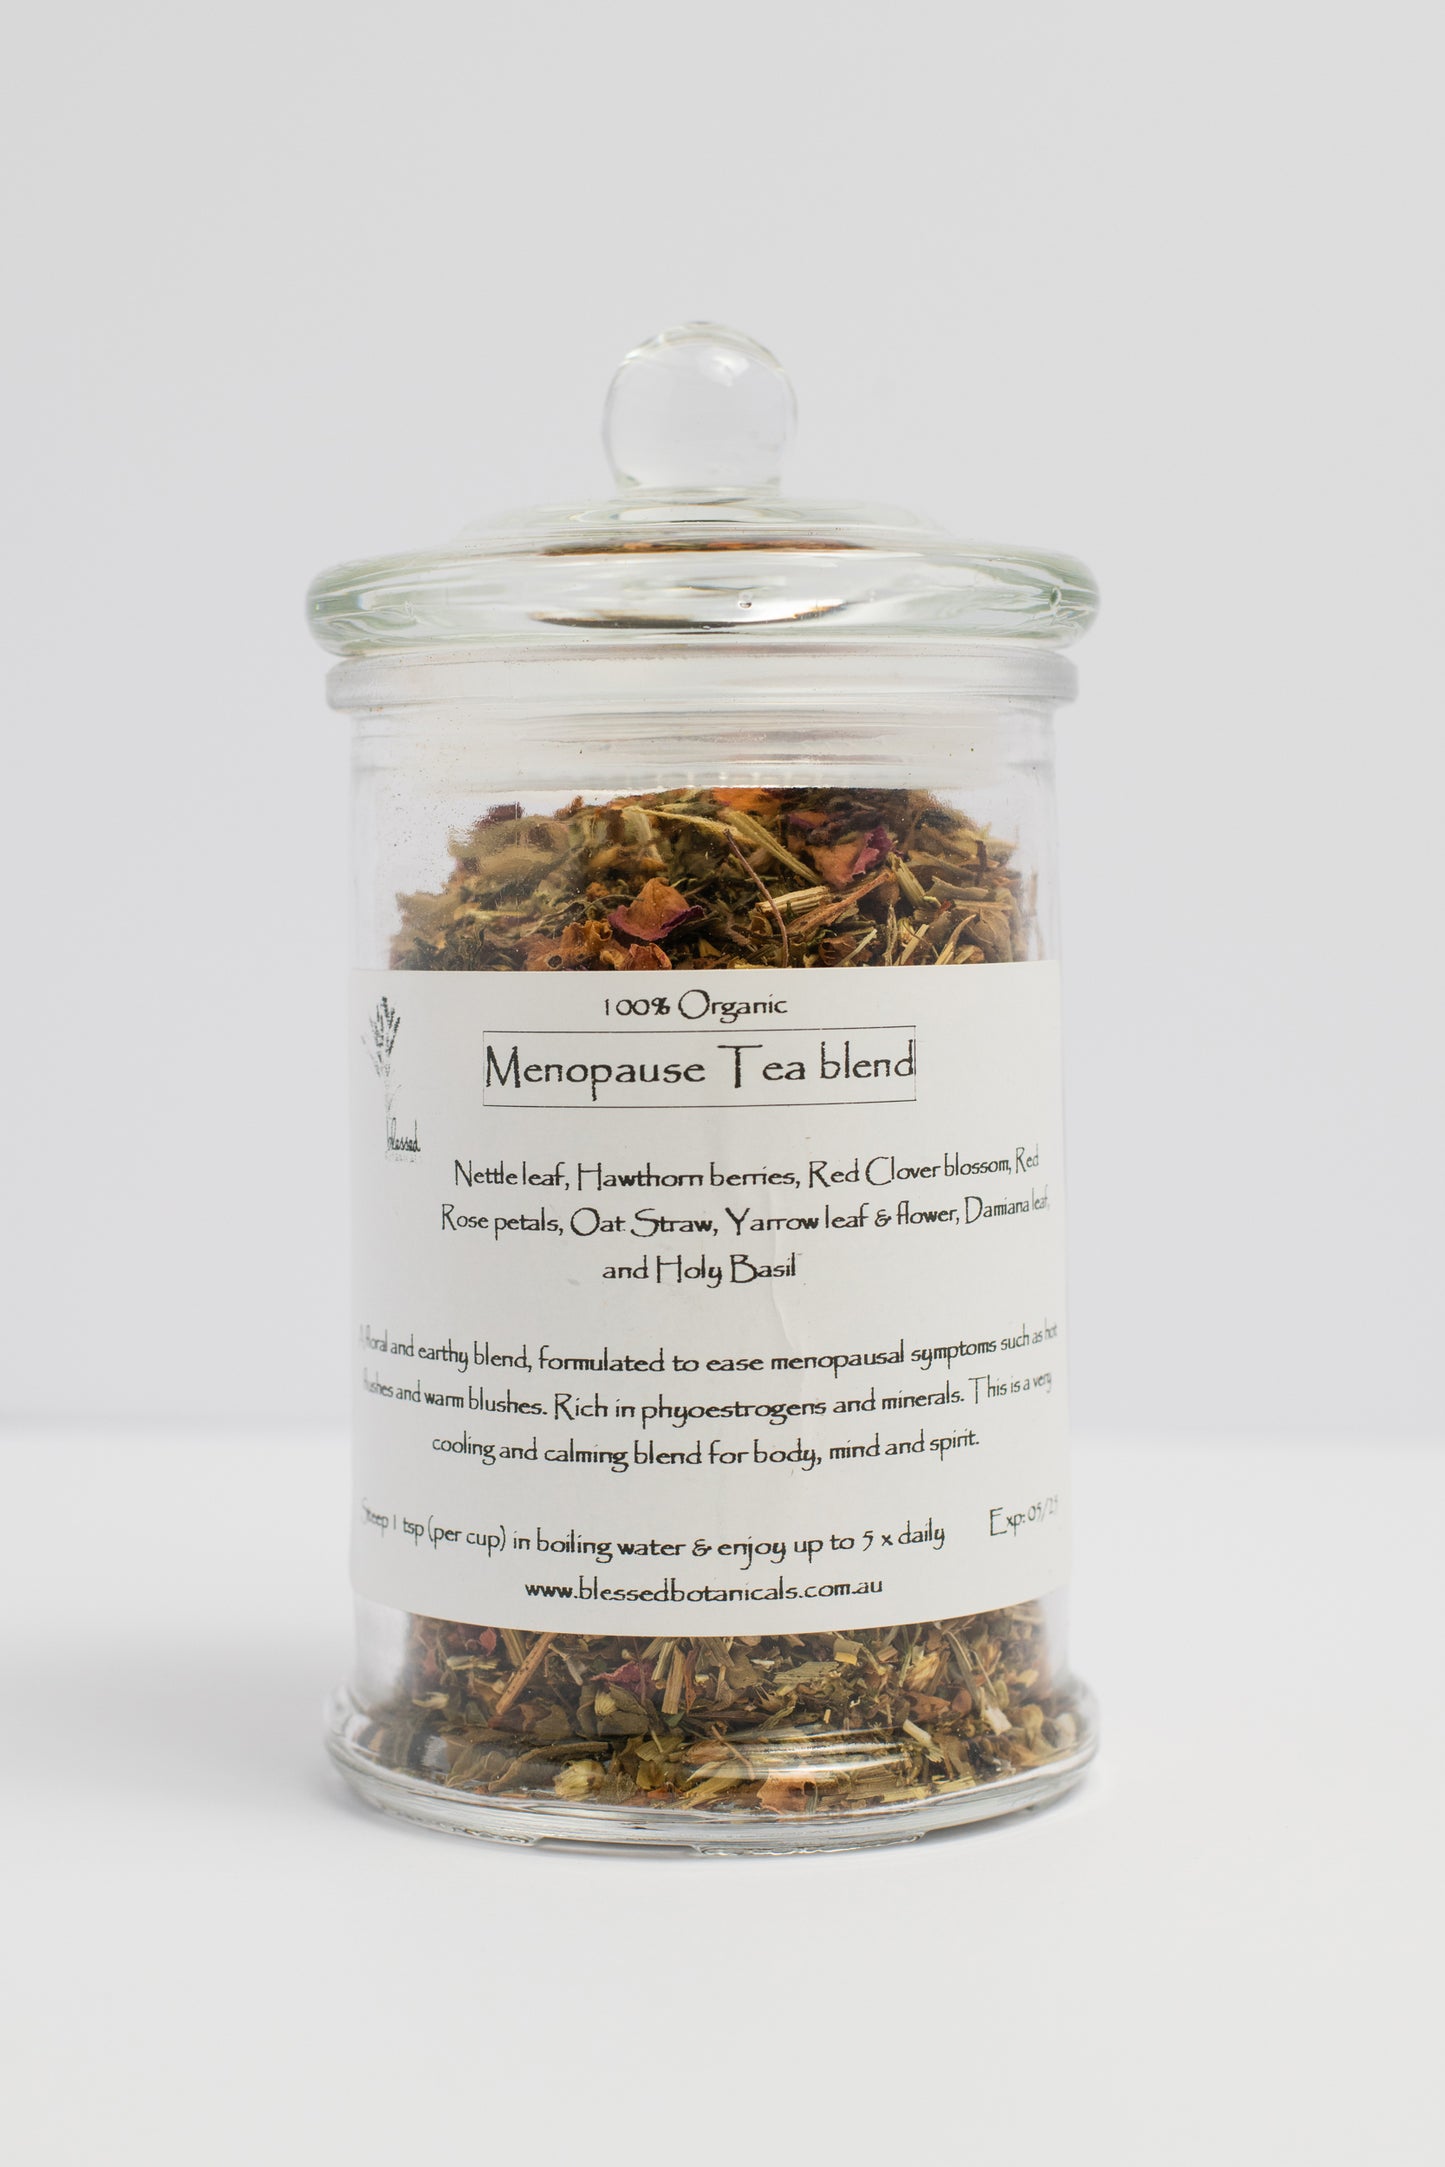 bespoke herbal tea, infusion, tissane, small batch, bespoke, artisan, dried herbs, herbal medicine, made to order, tailor made, organic, calm, sleep, insomnia, nervous system support. loose leaf tea. menopausal support. oestrogen decline. Nettle leaf, Hawthorn leaf, flower & berries, Red Clover, Red Rose petals, Yarrow, Damiana, Holy Basil. Phytoestrogens. Hormone modulation. Hormonal support. Change of life. Menopausal symptoms. hot flashes, anxiety, depression, mood swings.